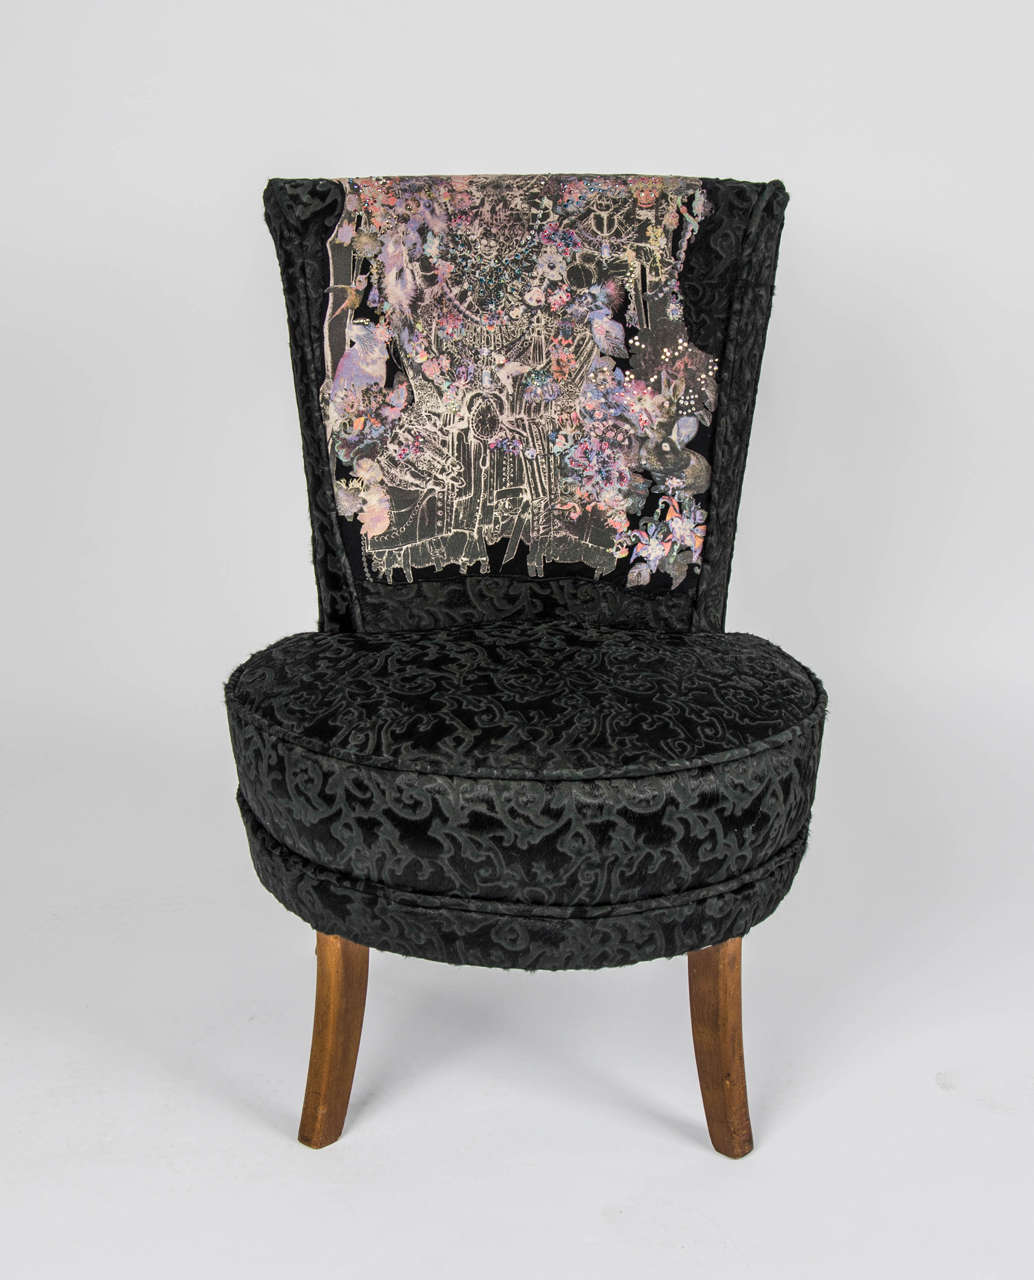 A unique 1946 small black 'Boudoir' chair. It has been revamped in a Rock and Roll style and re-upholstered with embossed pony skin, crystal and rhinestone detail.

Maker unknown.
